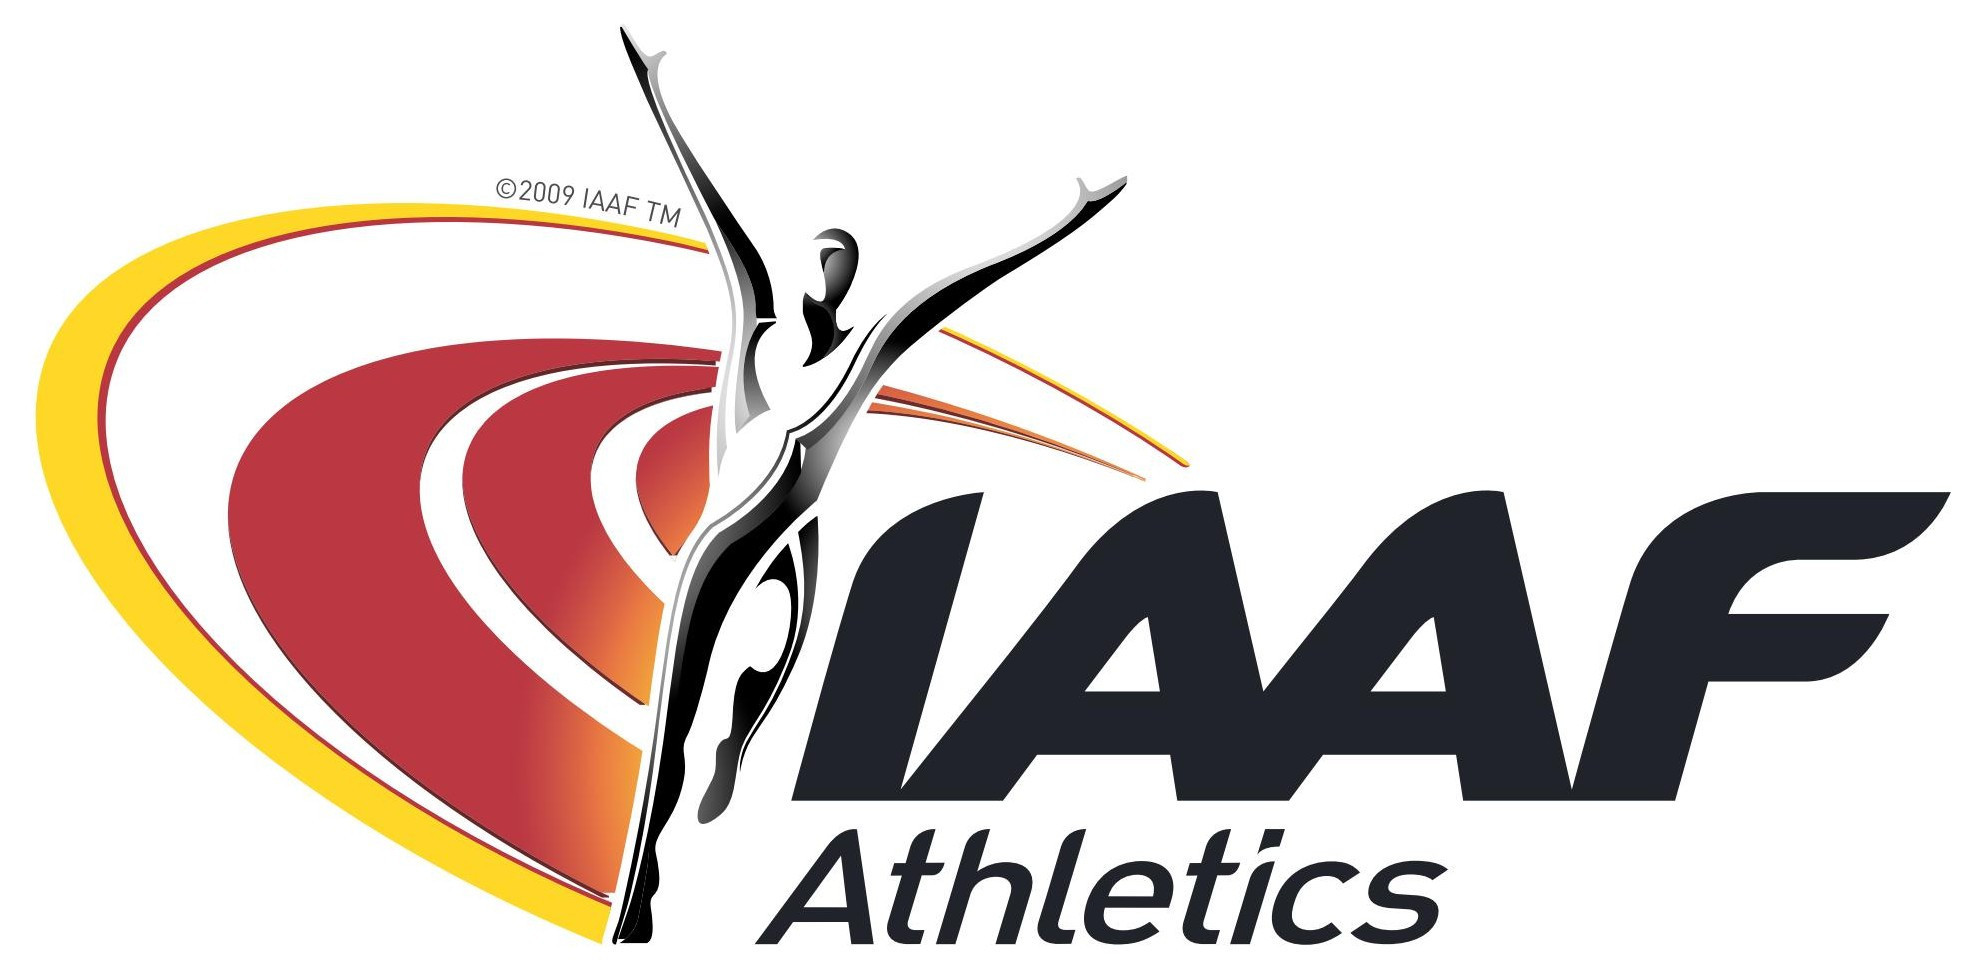 Three senior management appointments have been unveiled by the IAAF ©IAAF